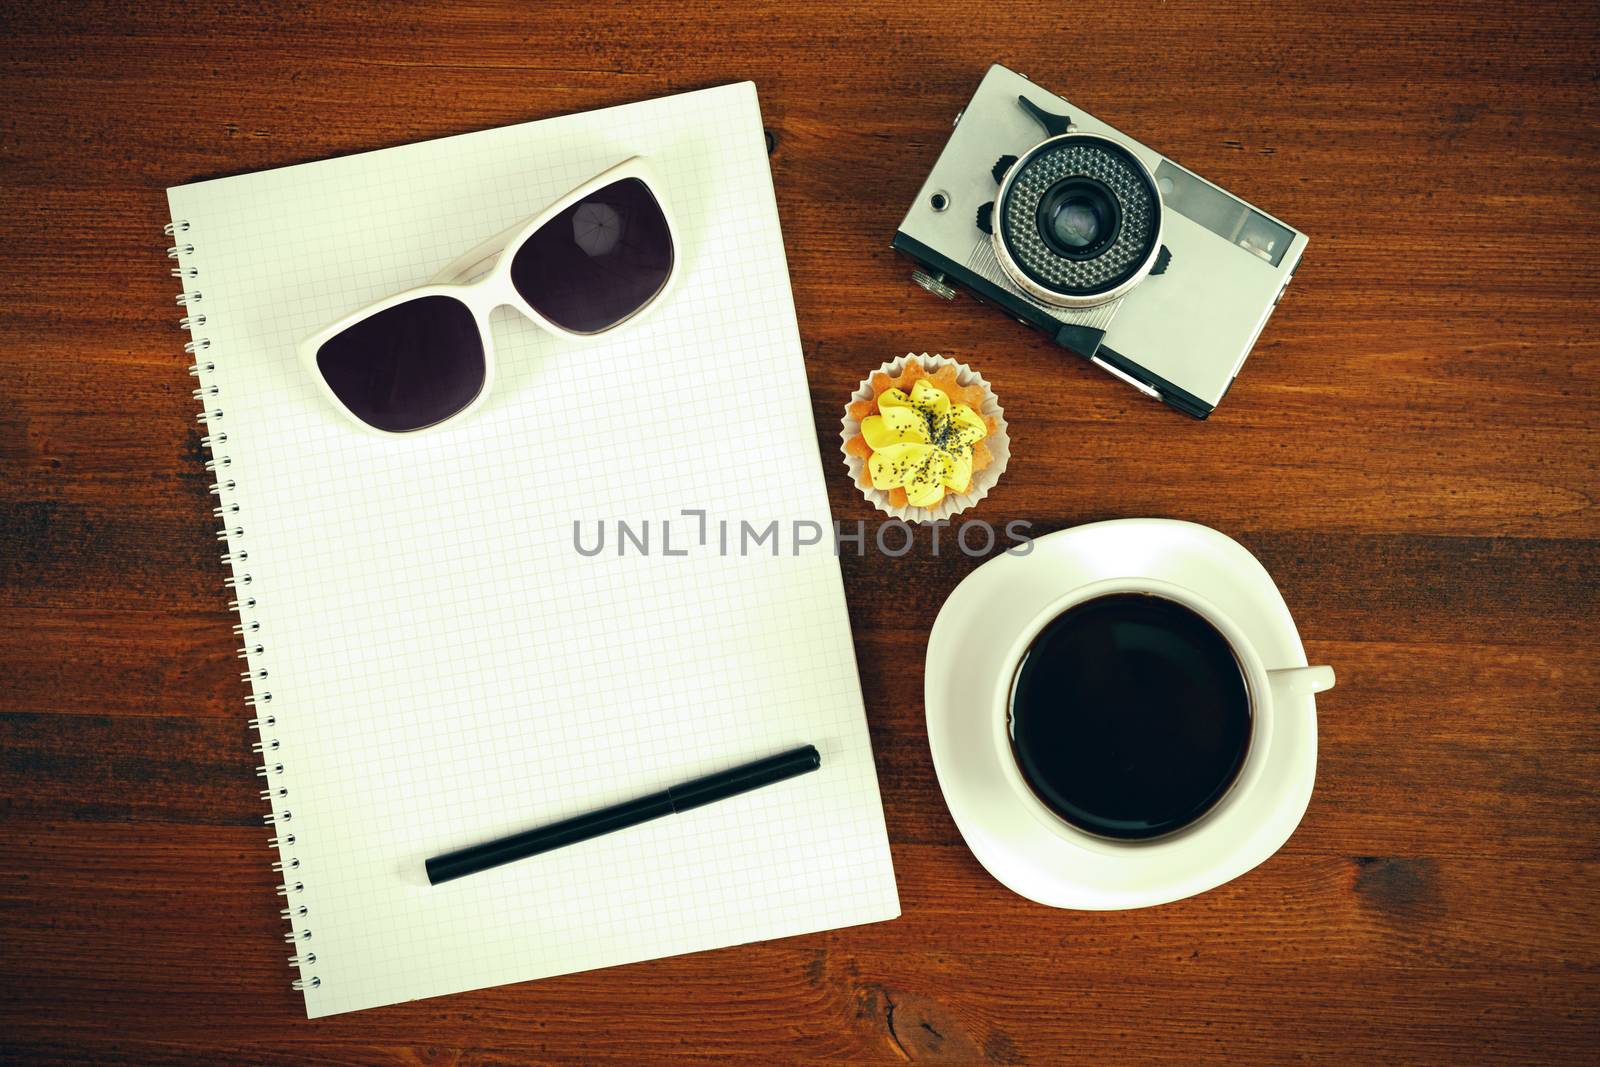 Retro film photo camera, sunglasses, cupcake, cup of coffee and by Nobilior